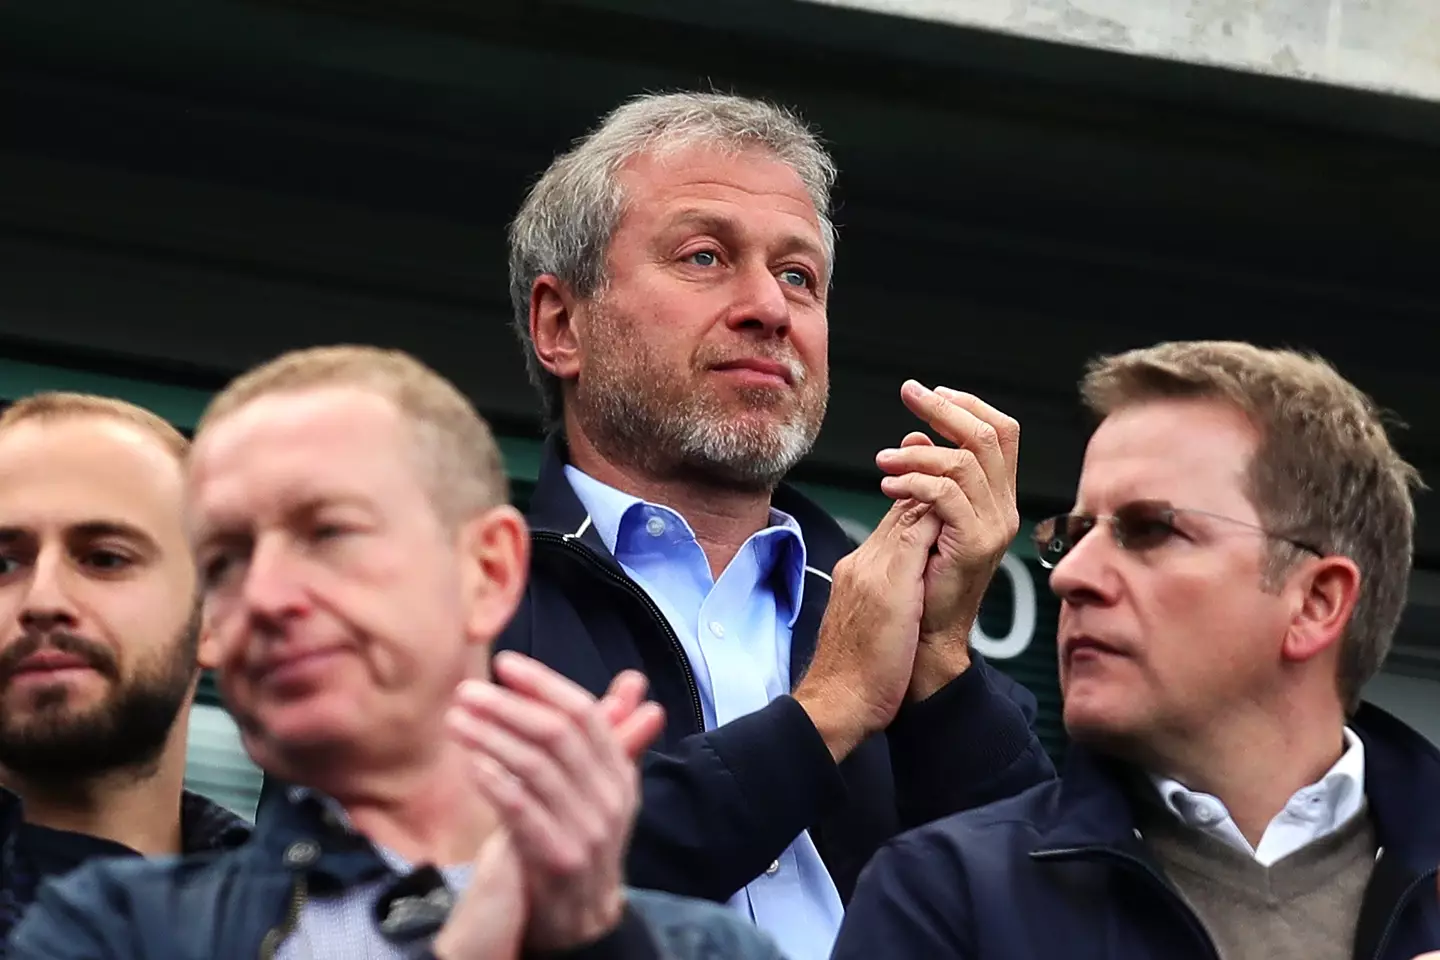 Chelsea are currently under investigation by the Premier League and Football Association. (Image